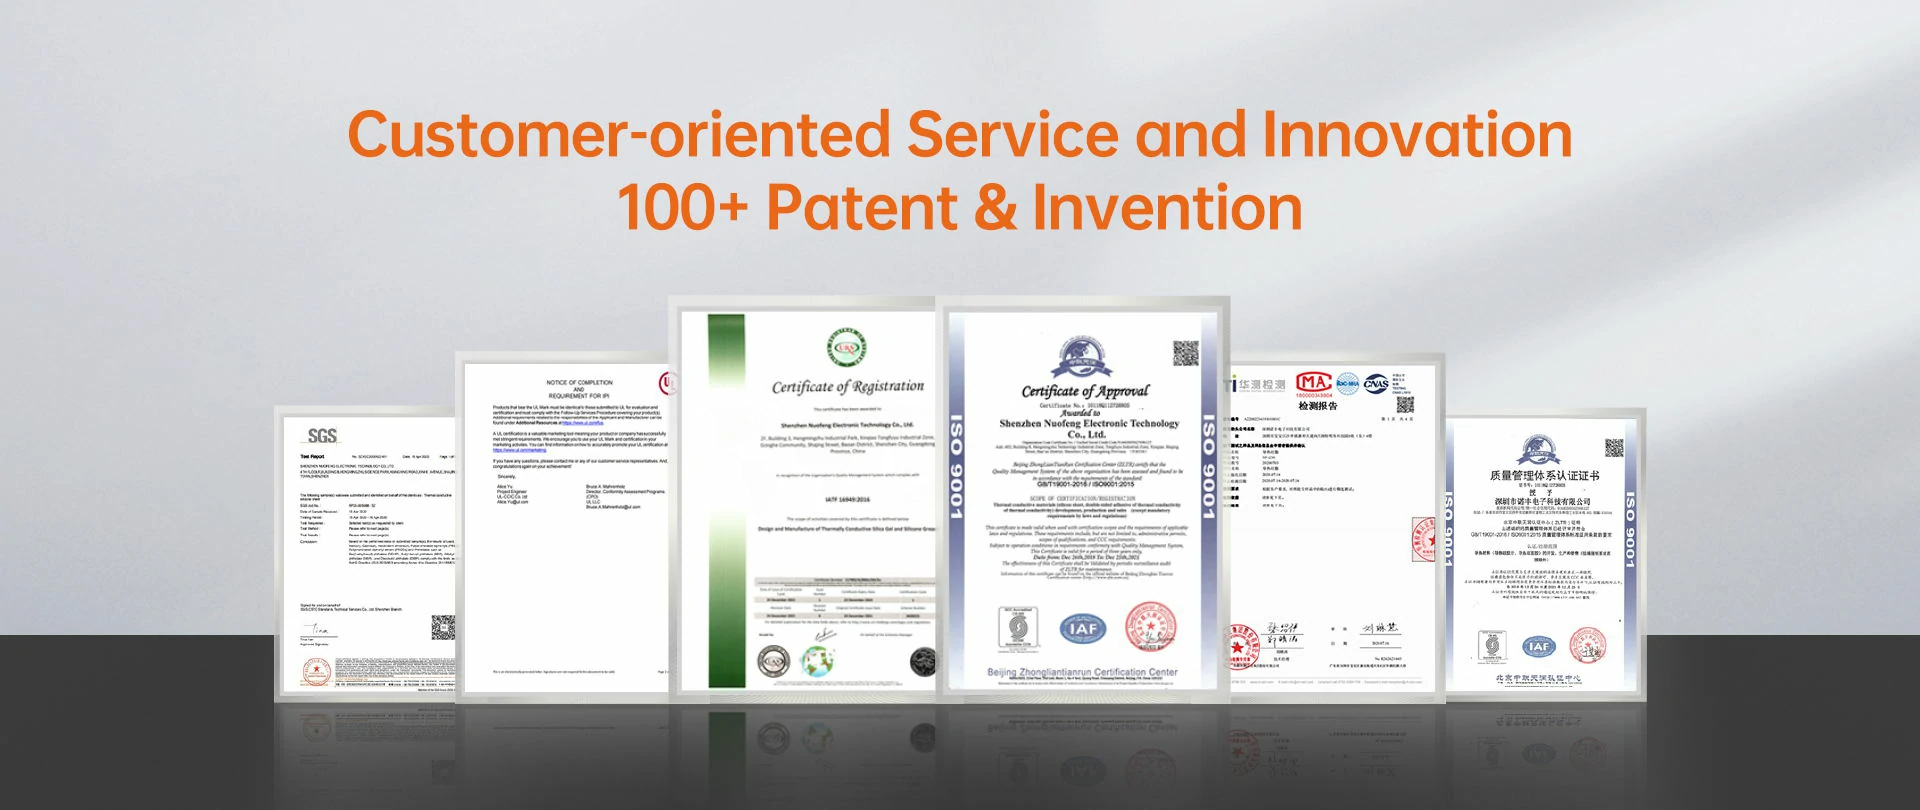 Customer-oriented Service and Innovation 100+ Patent & Invention